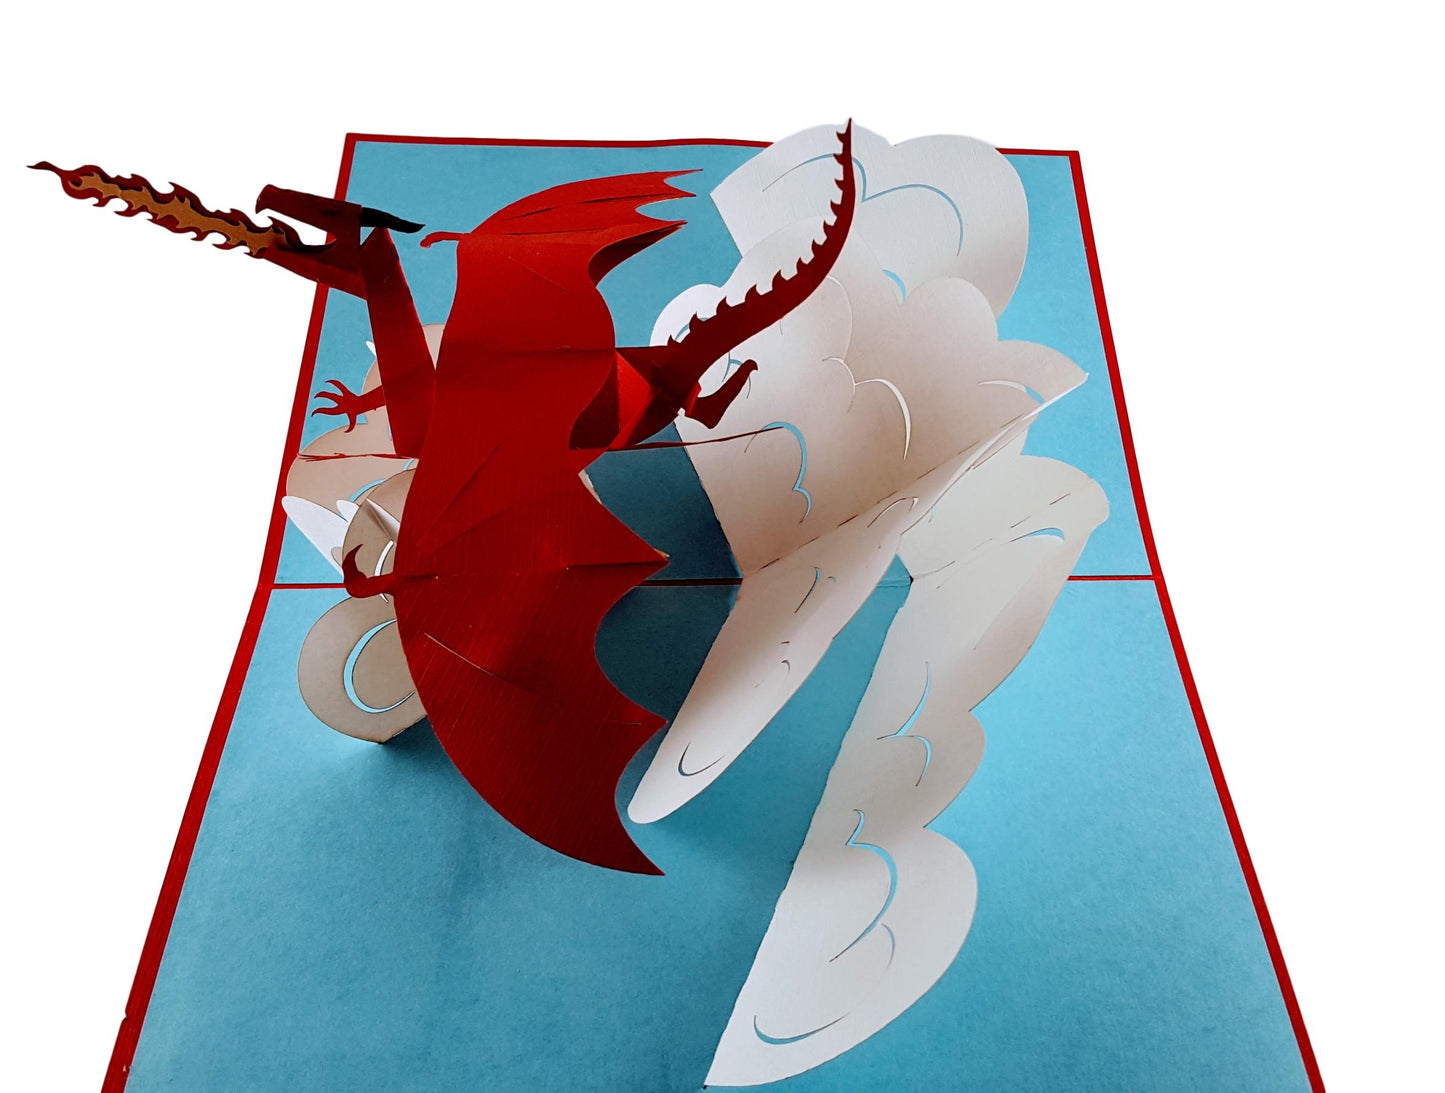 Fire Breathing Dragon 3D Pop Up Greeting Card - Birthday - Congratulations - Get Well - Just Because - iGifts And Cards